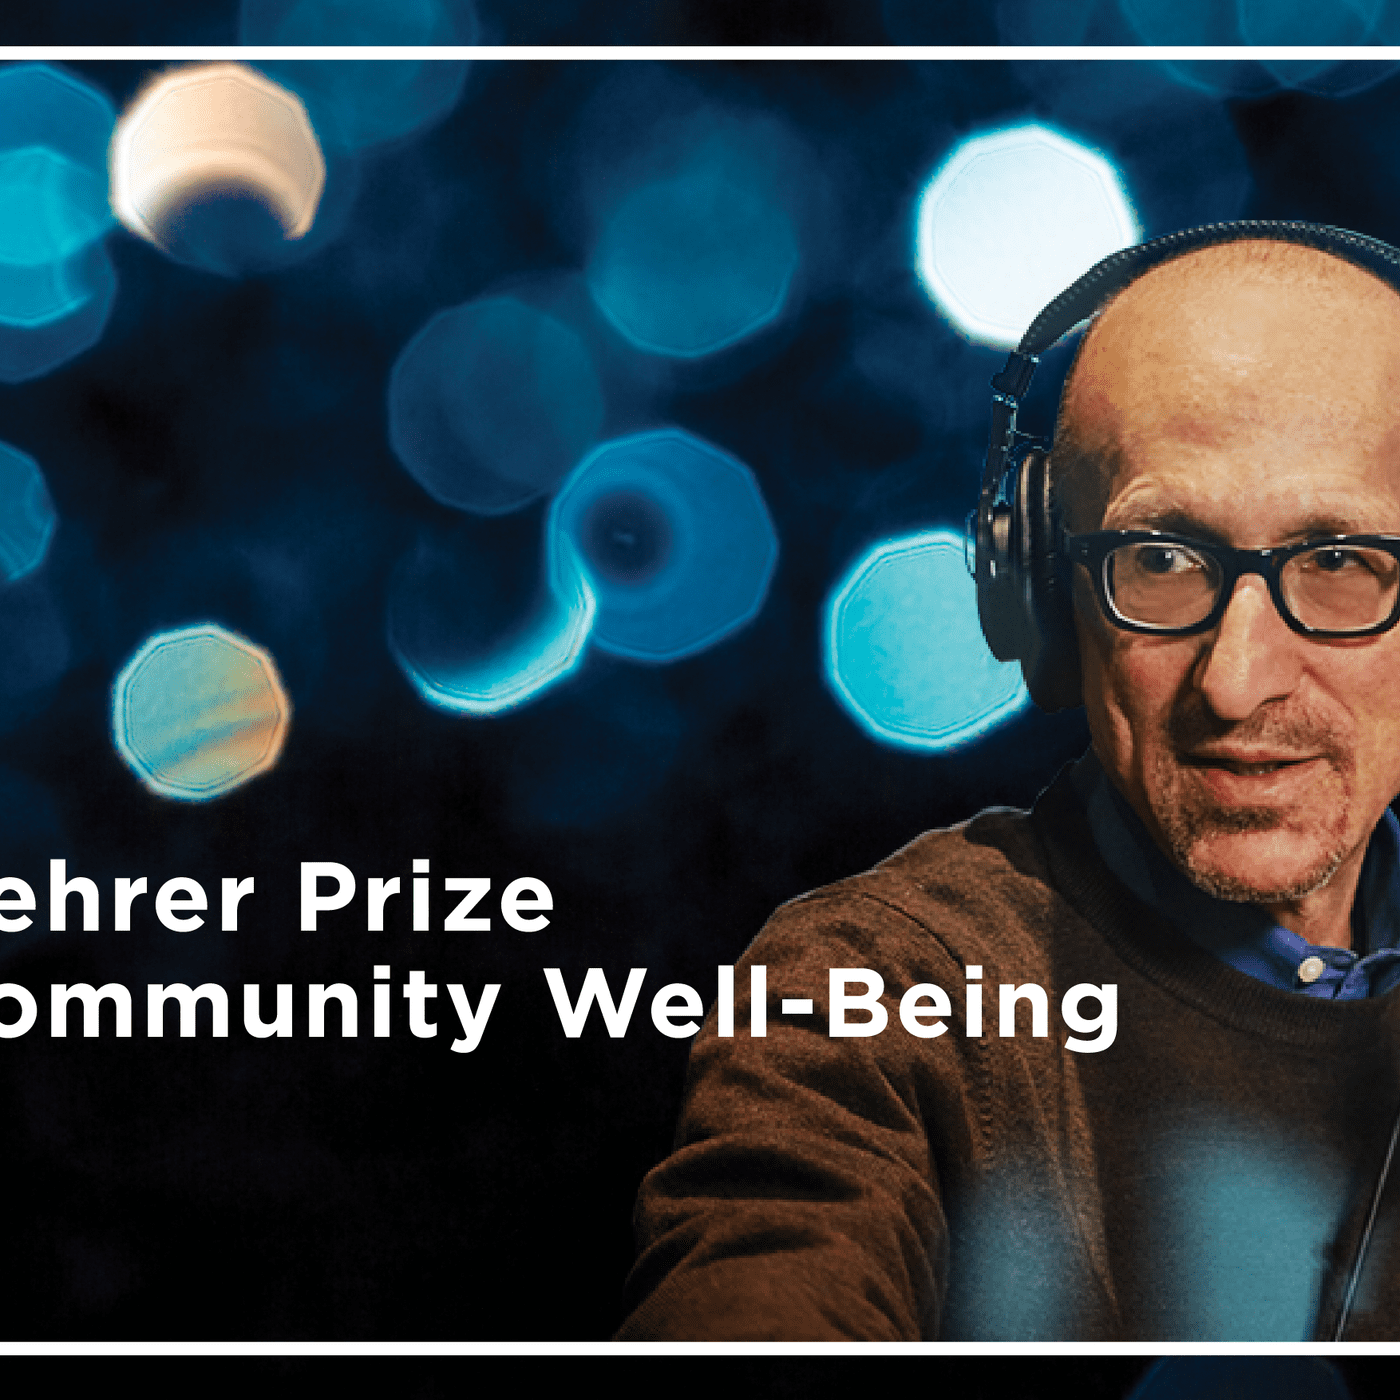 This Year's Lehrer Prize: Social And Emotional Learning For Kids